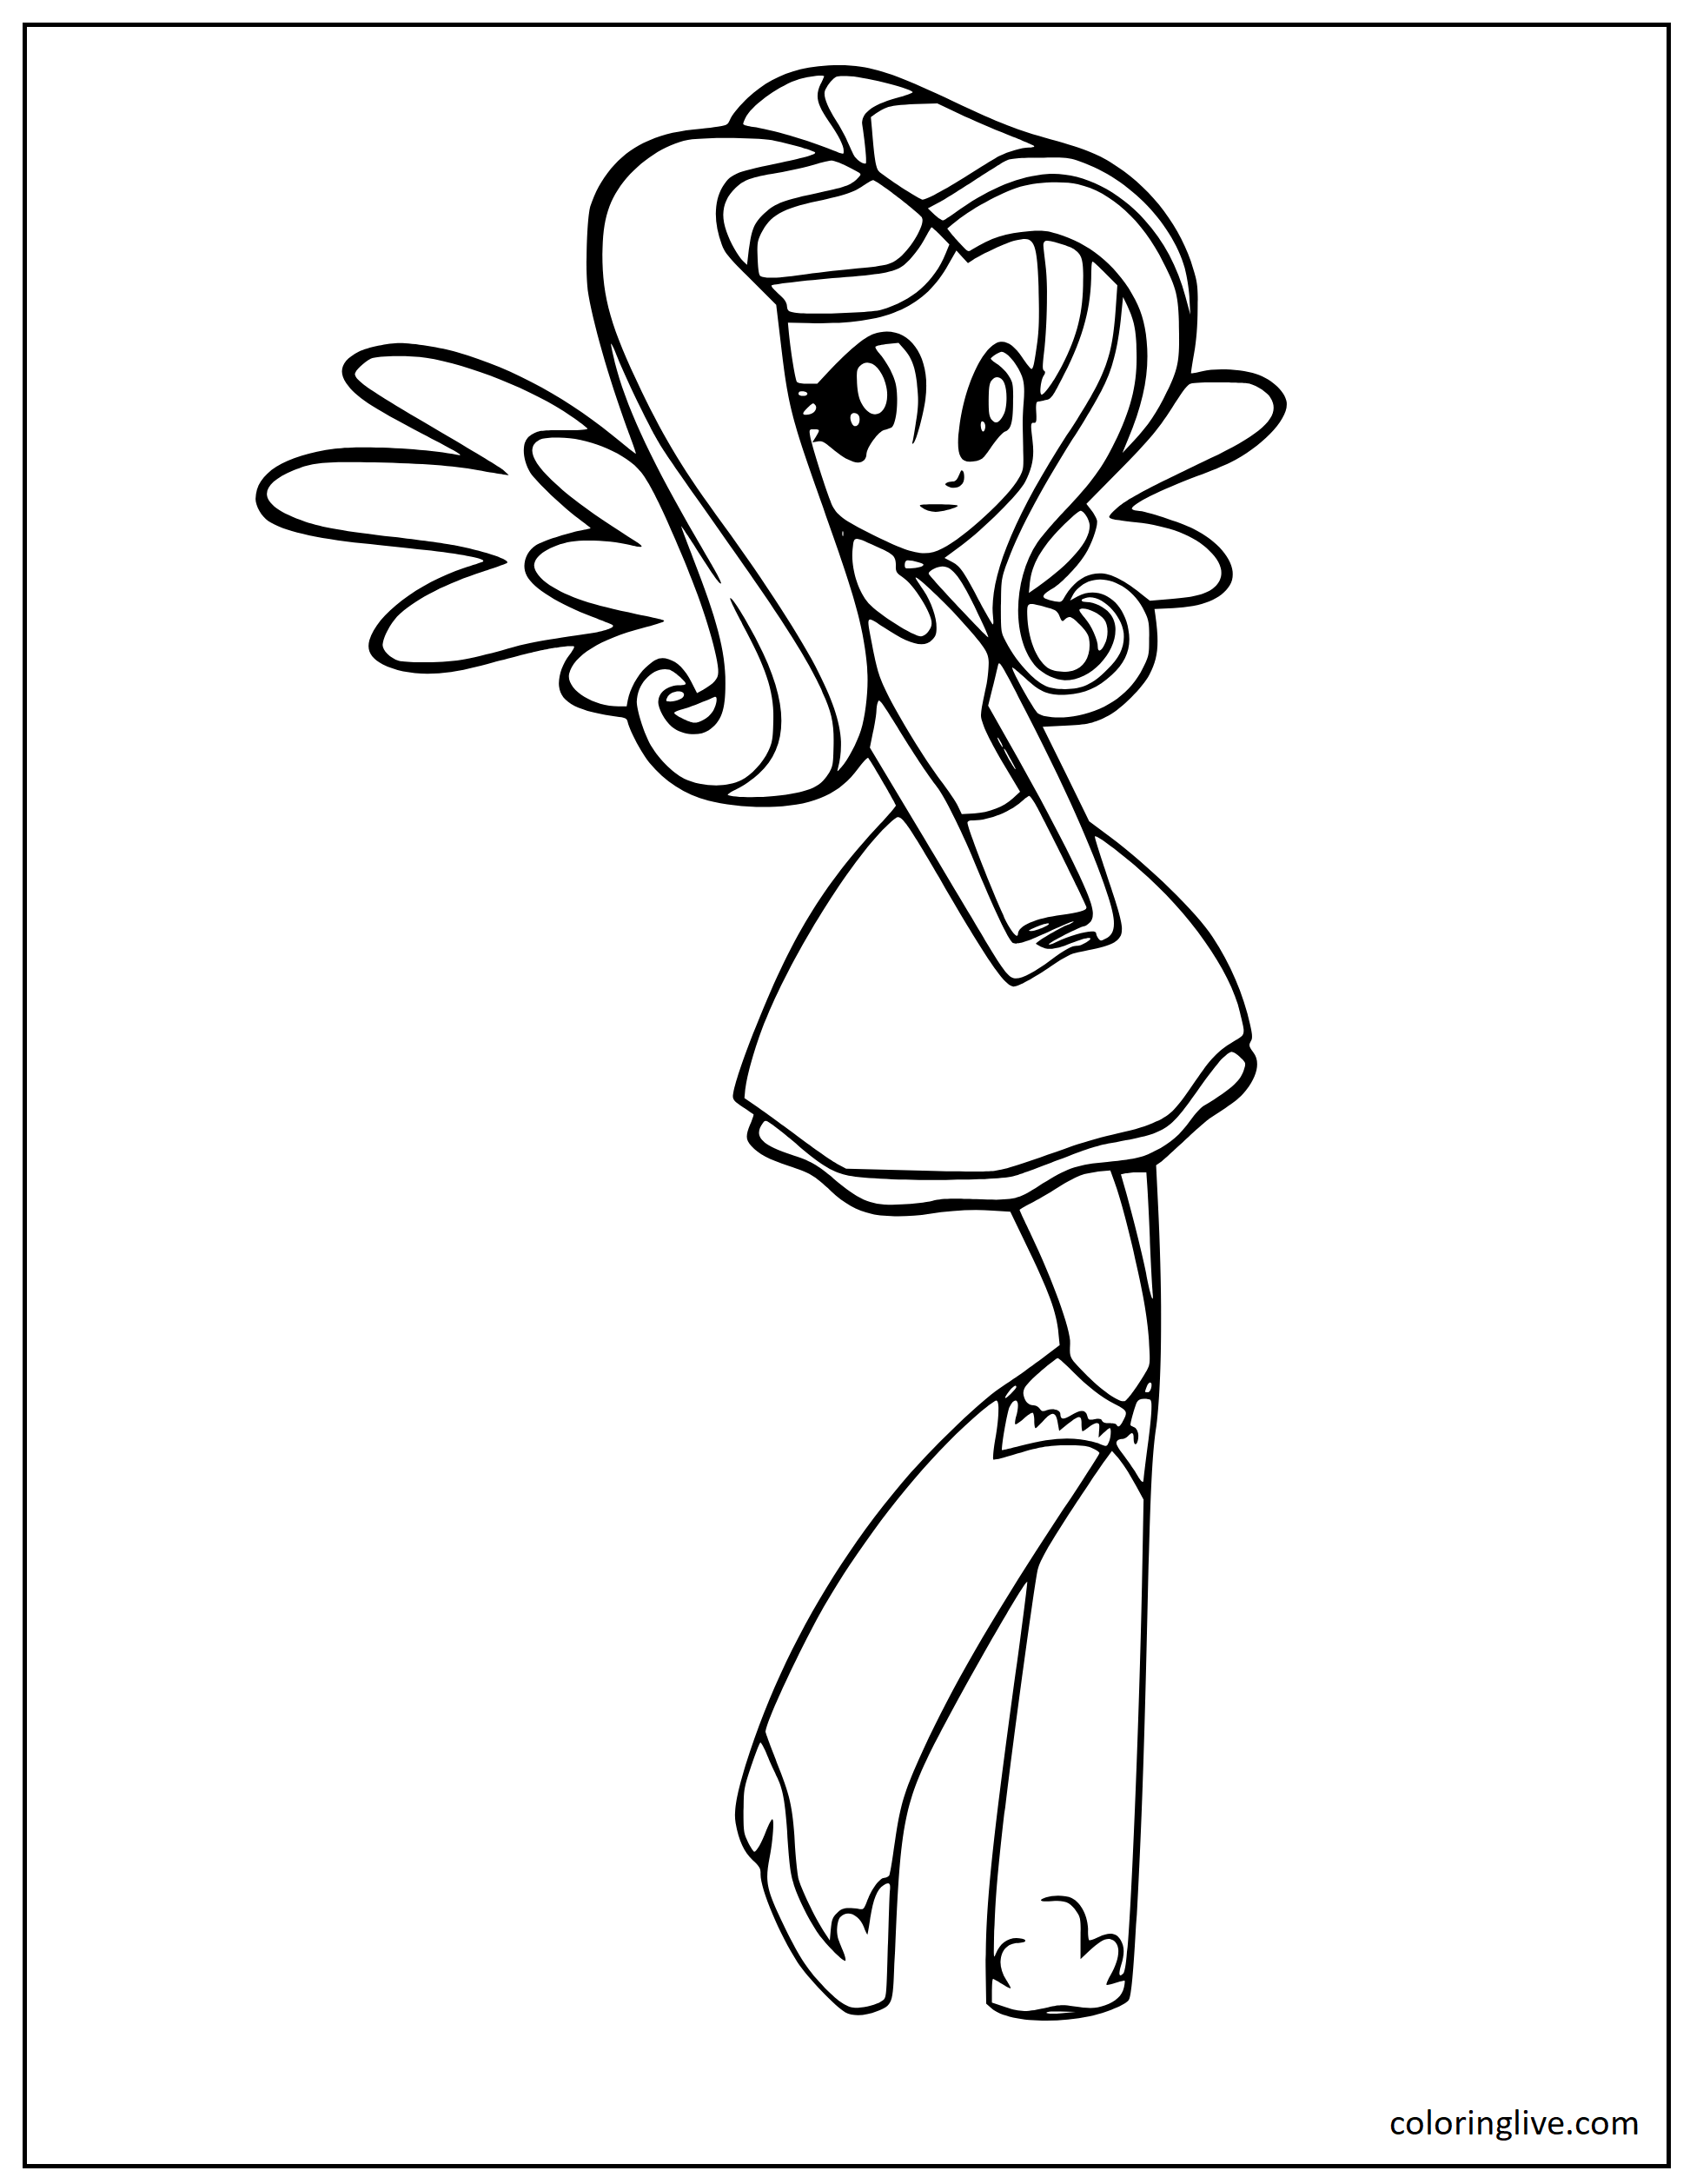 Printable Twilight Sparkle Coloring Page for kids.